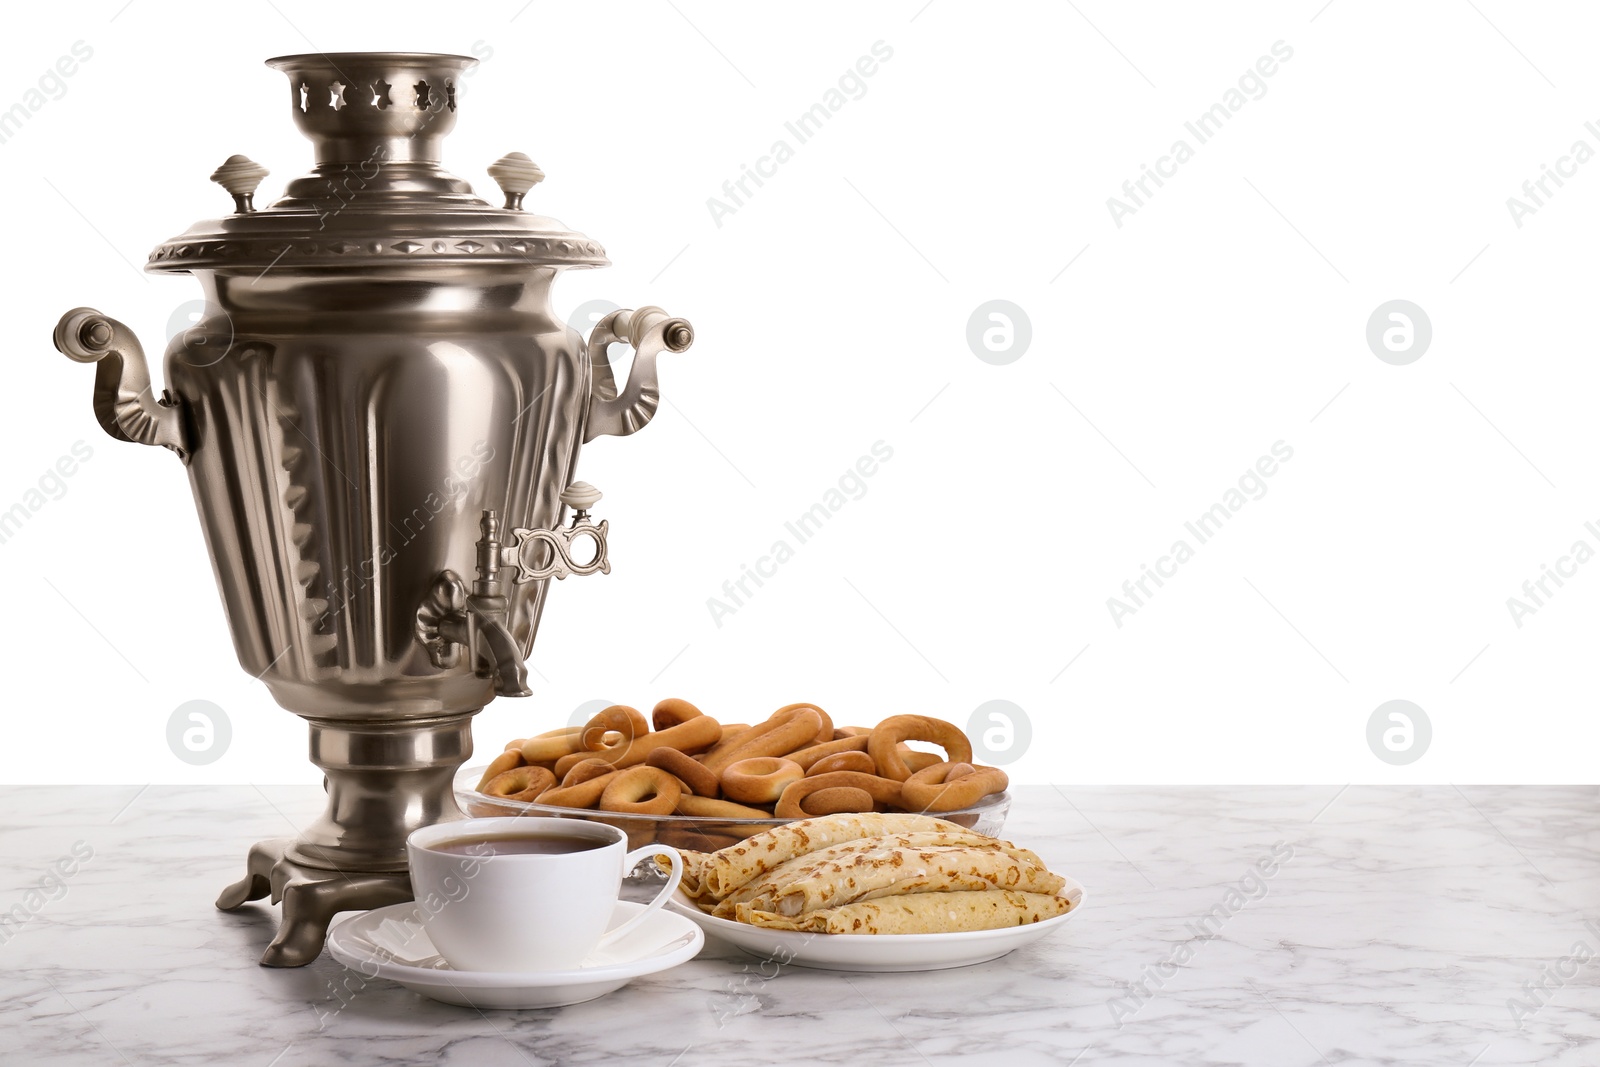 Photo of Vintage samovar, cup of hot drink and snacks on marble table against white background, space for text. Traditional Russian tea ceremony